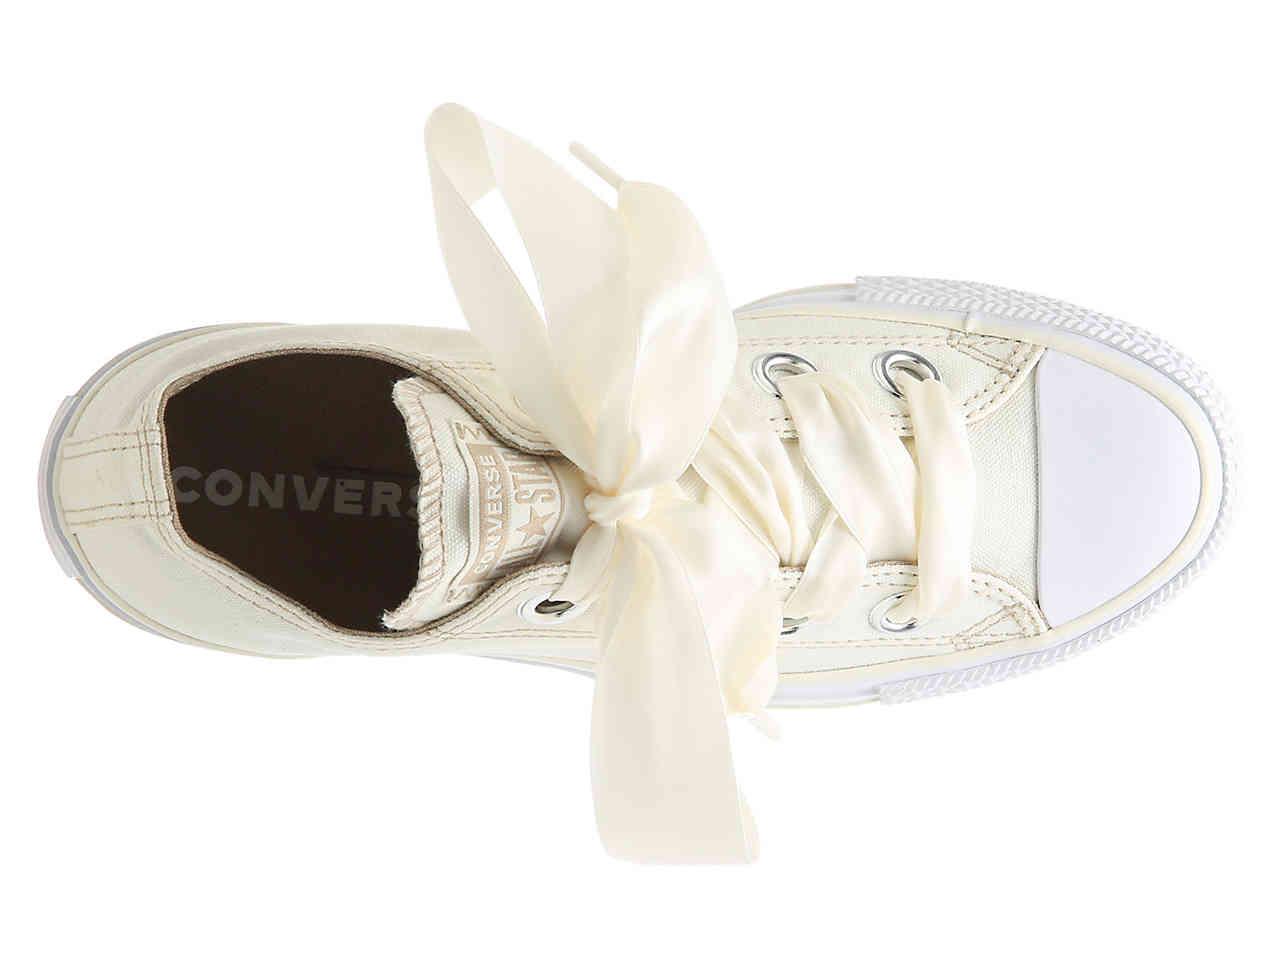 Converse Satin Chuck Taylor All Star Egret Ribbon Sneaker in White | Lyst